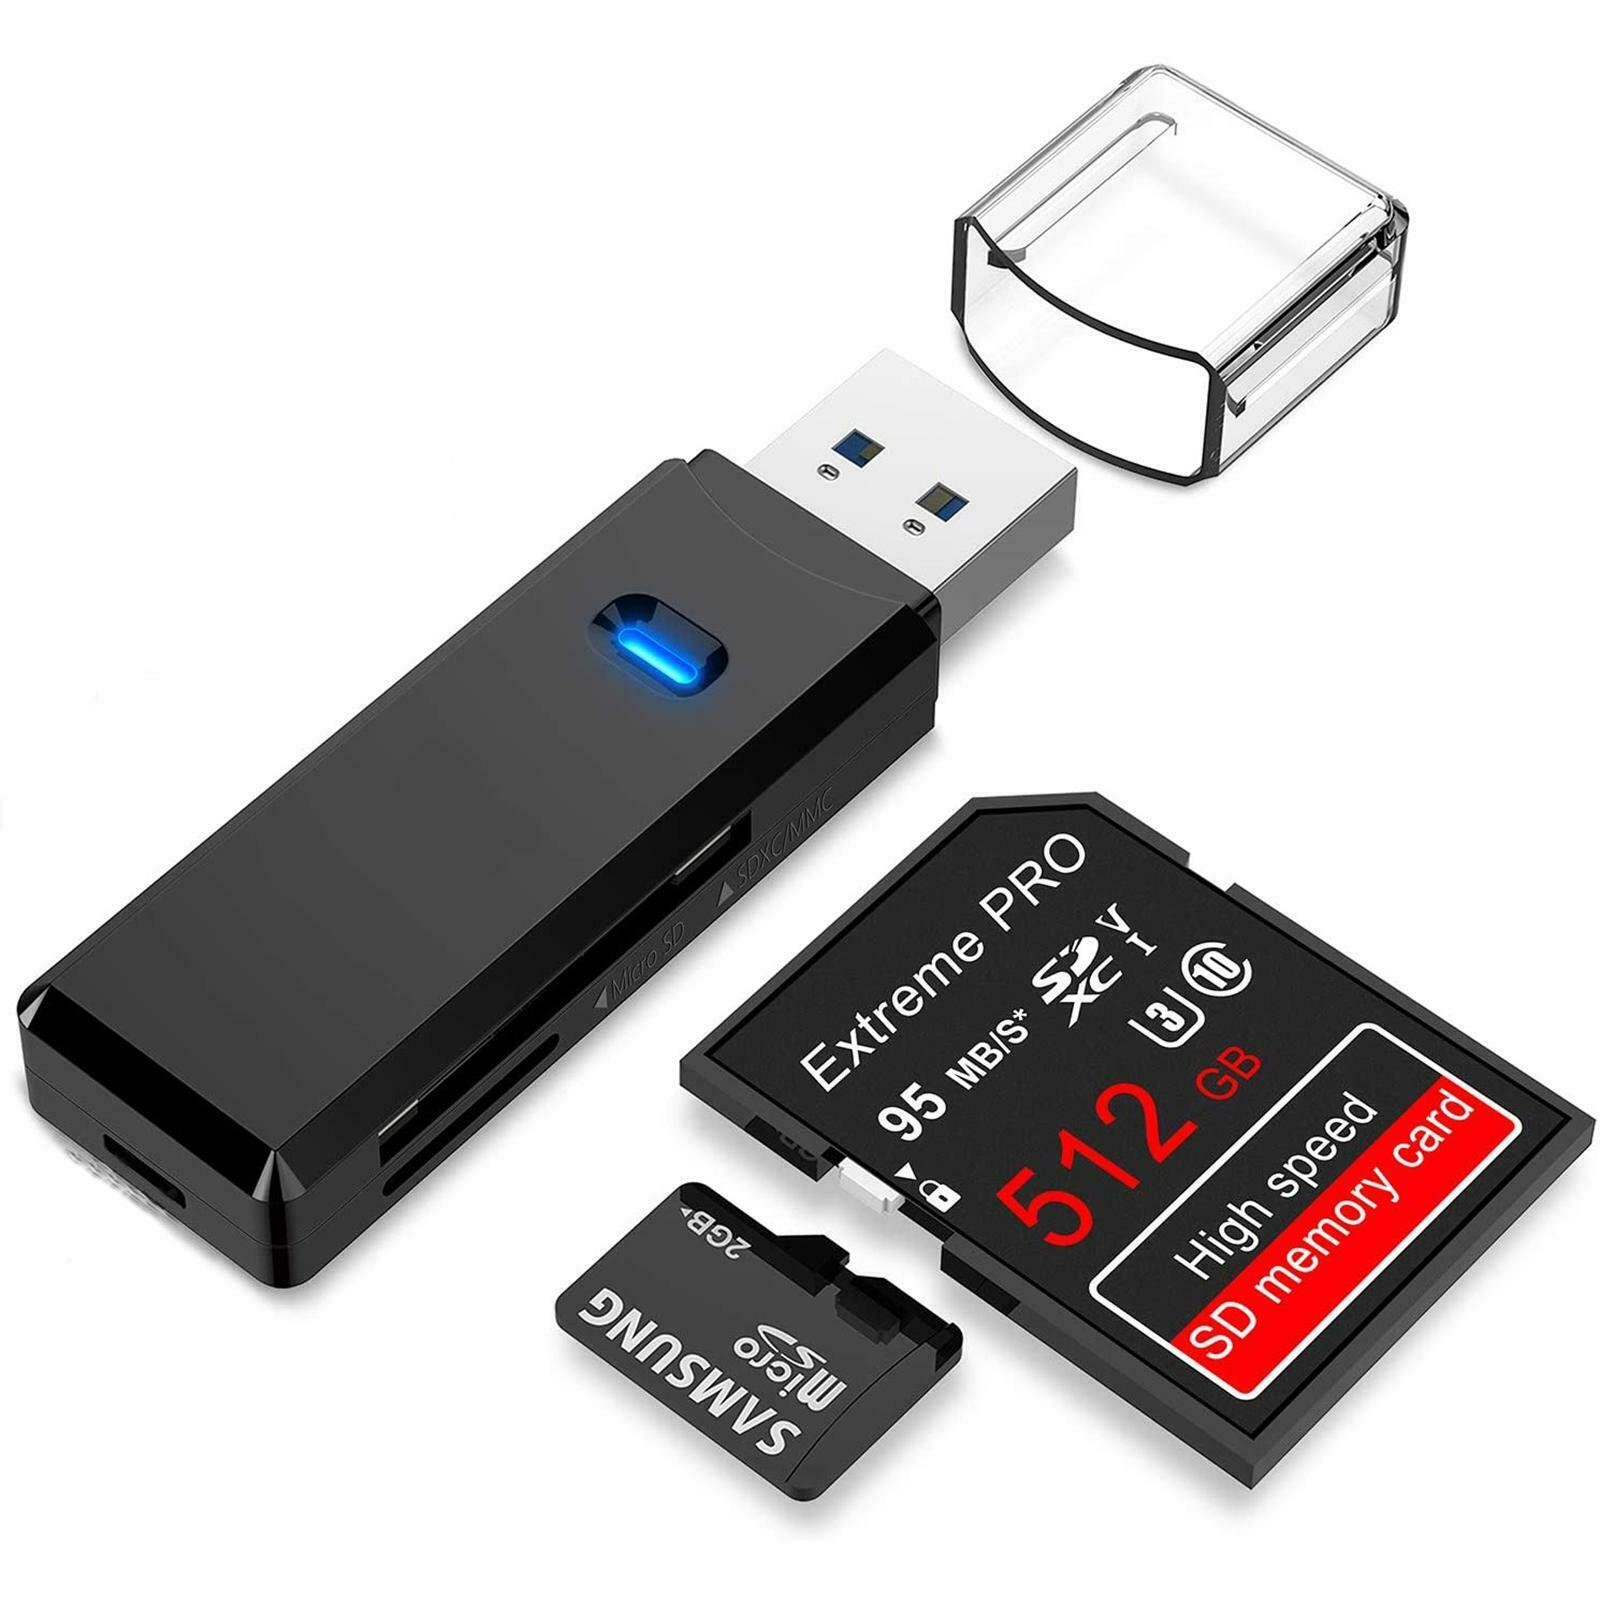 What Type Of File System Is Used By SDXC Memory Cards?